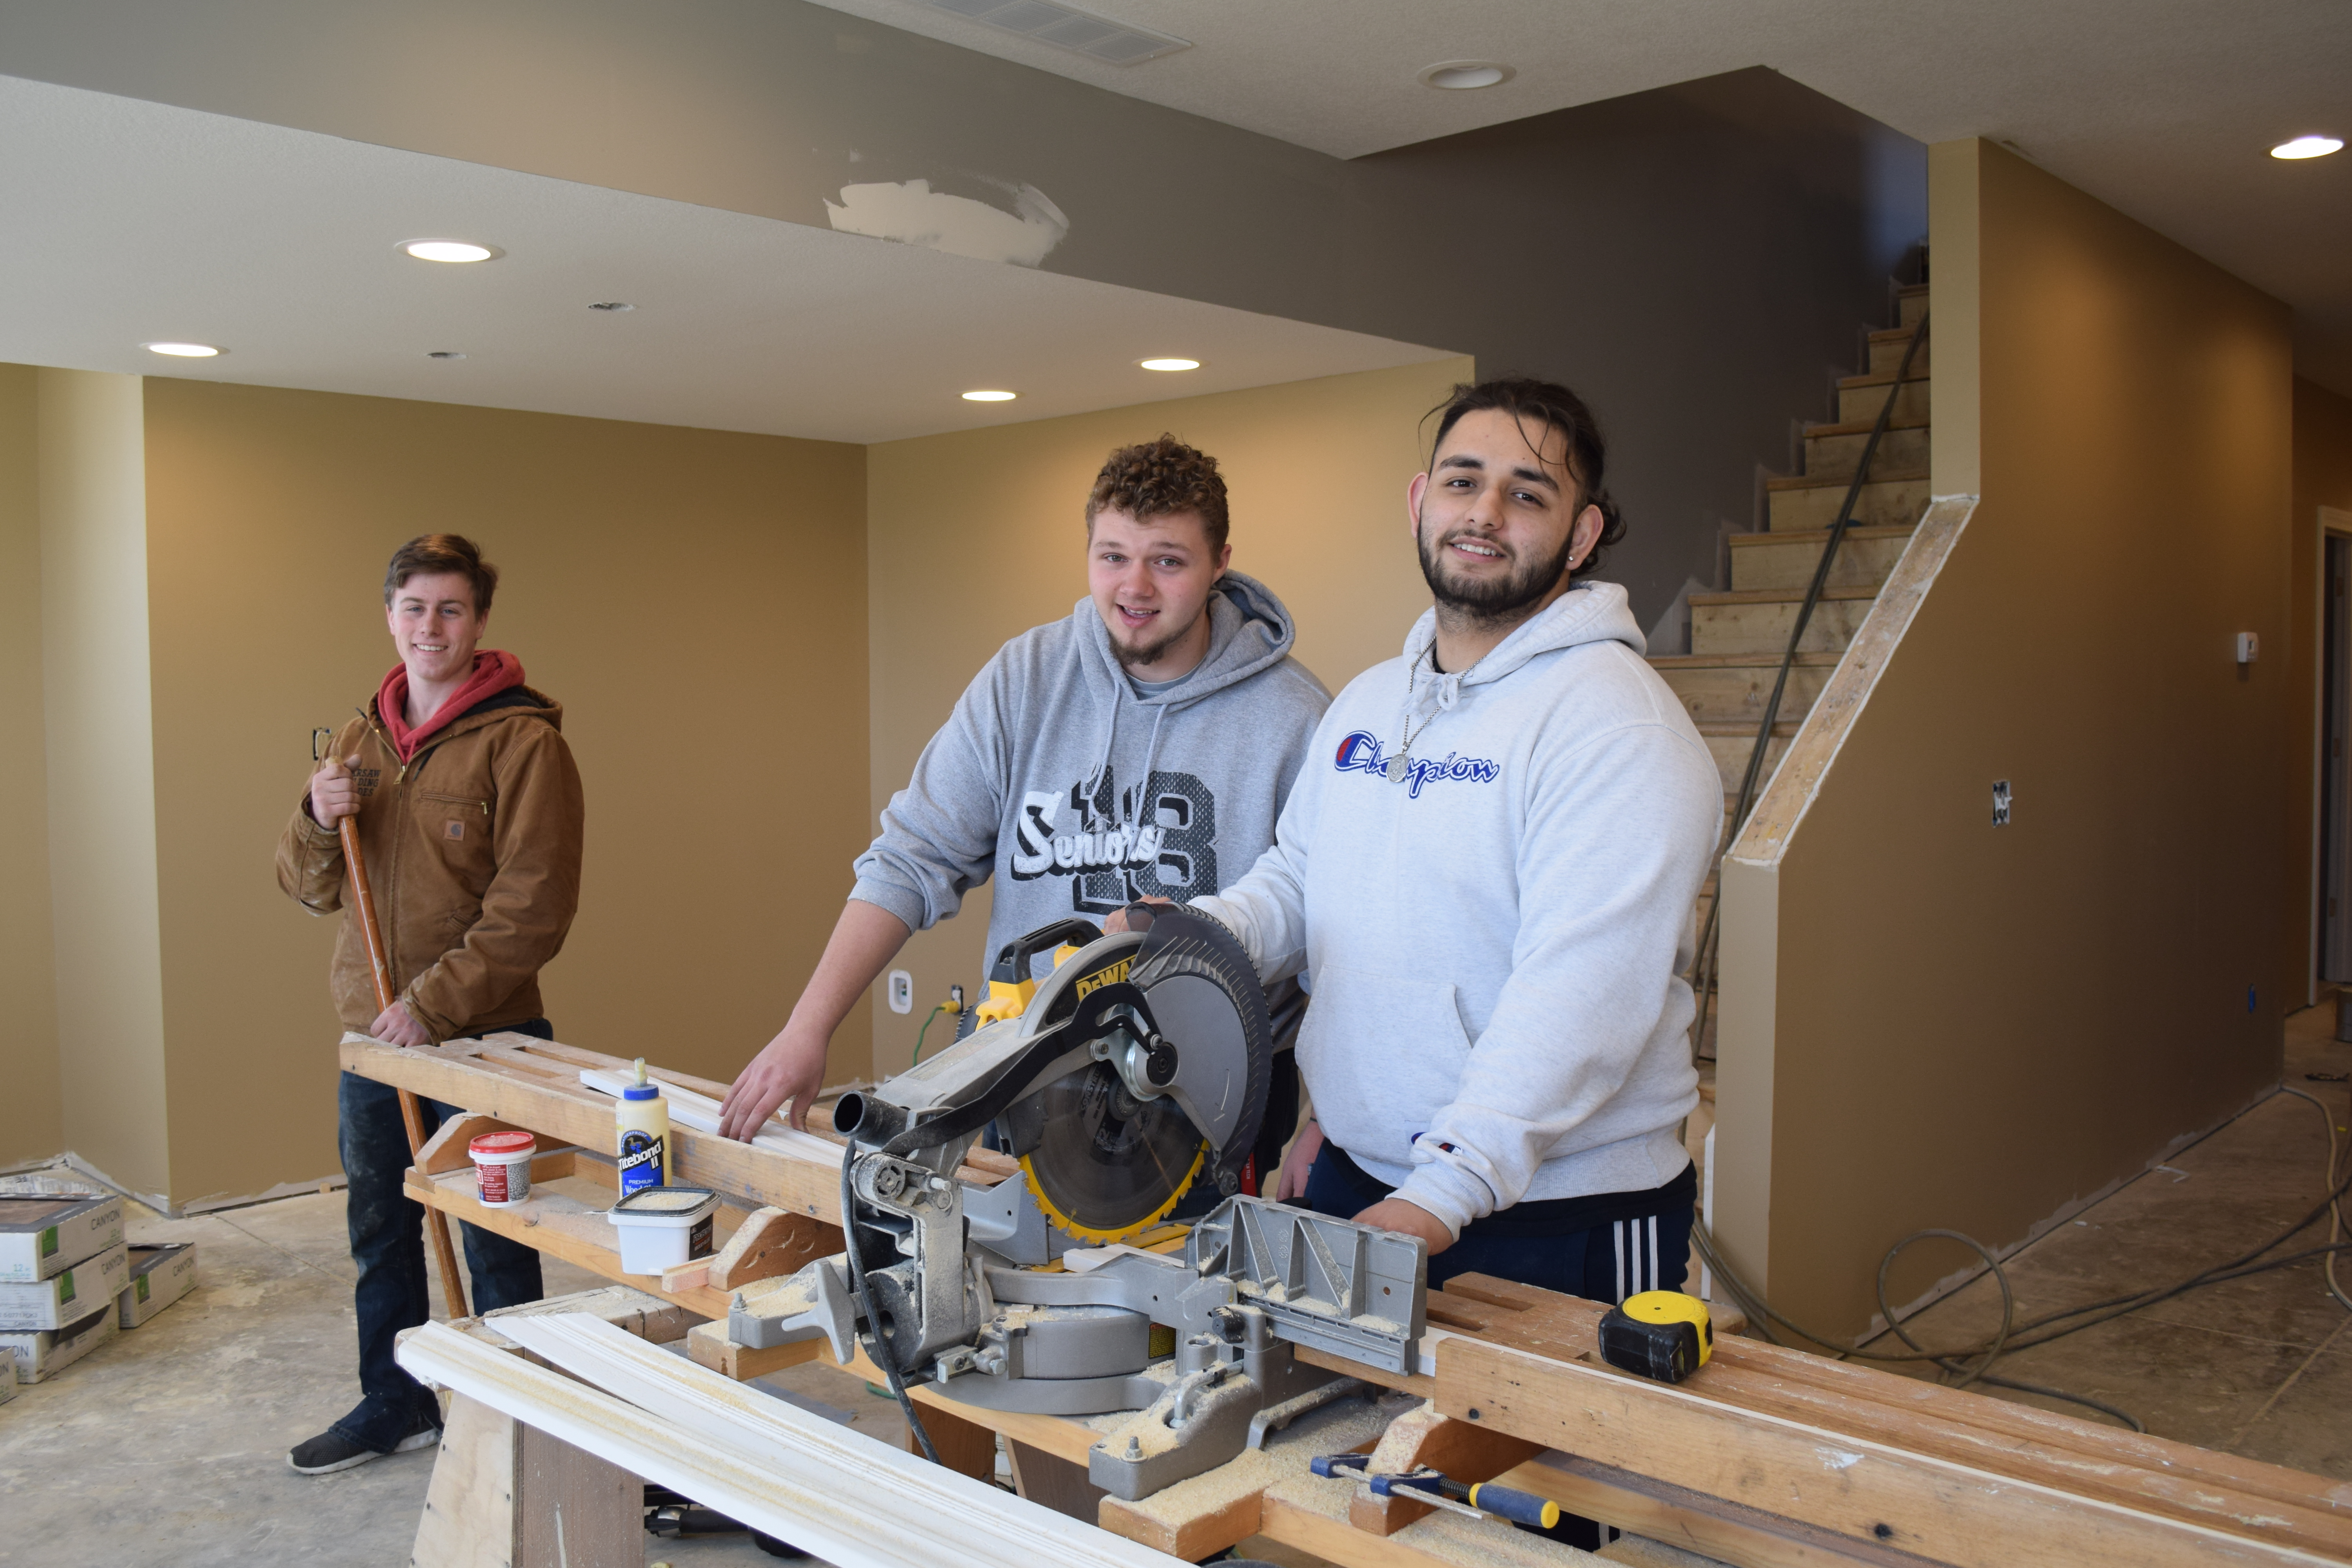 Building Trades Program students smile while they work with a skill saw 